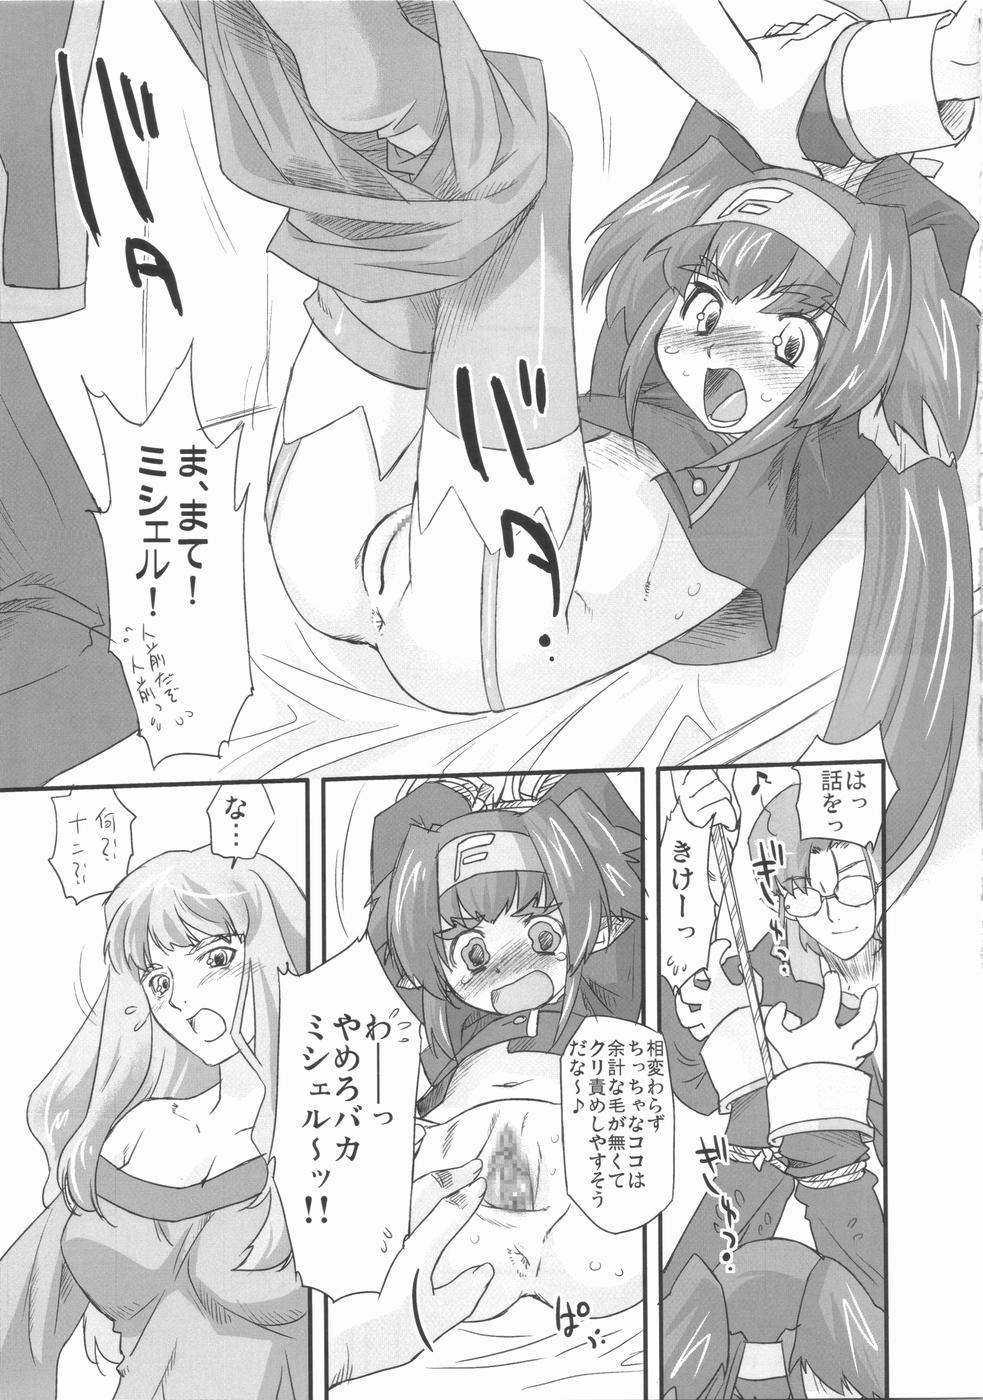 Masterbation Frontier Spirits! - Macross frontier Sister - Page 7